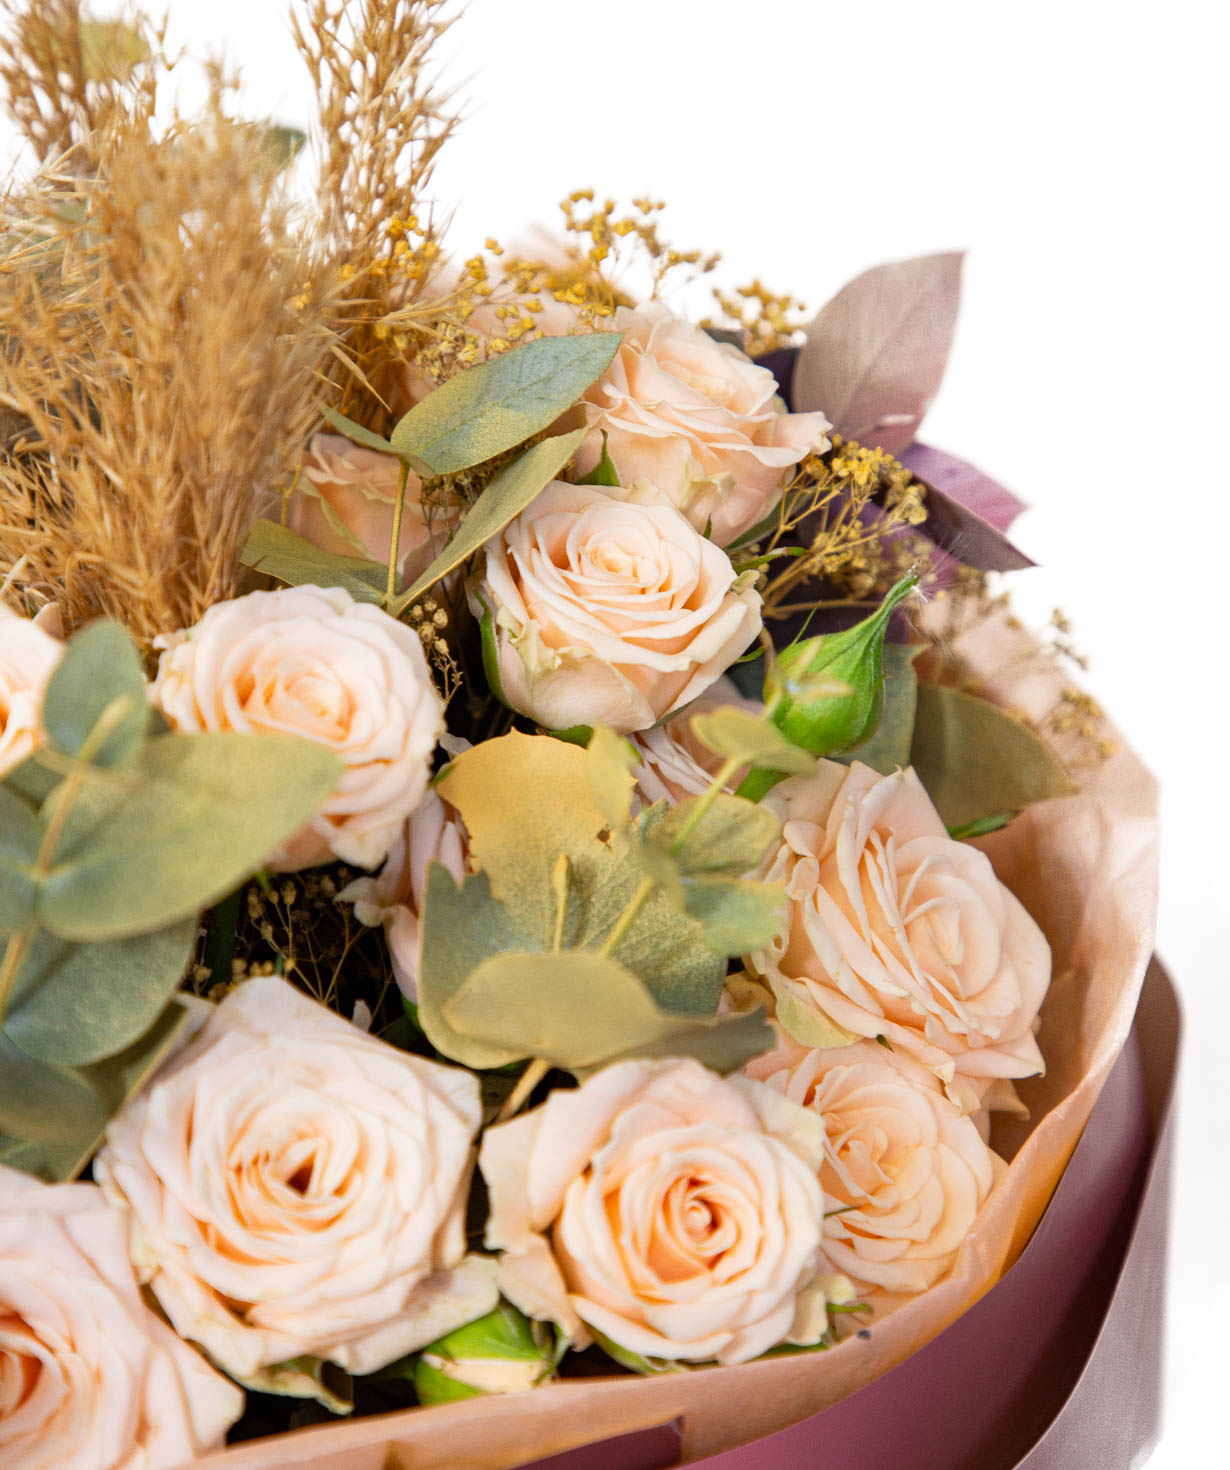 Bouquet «Hansi» with spray roses